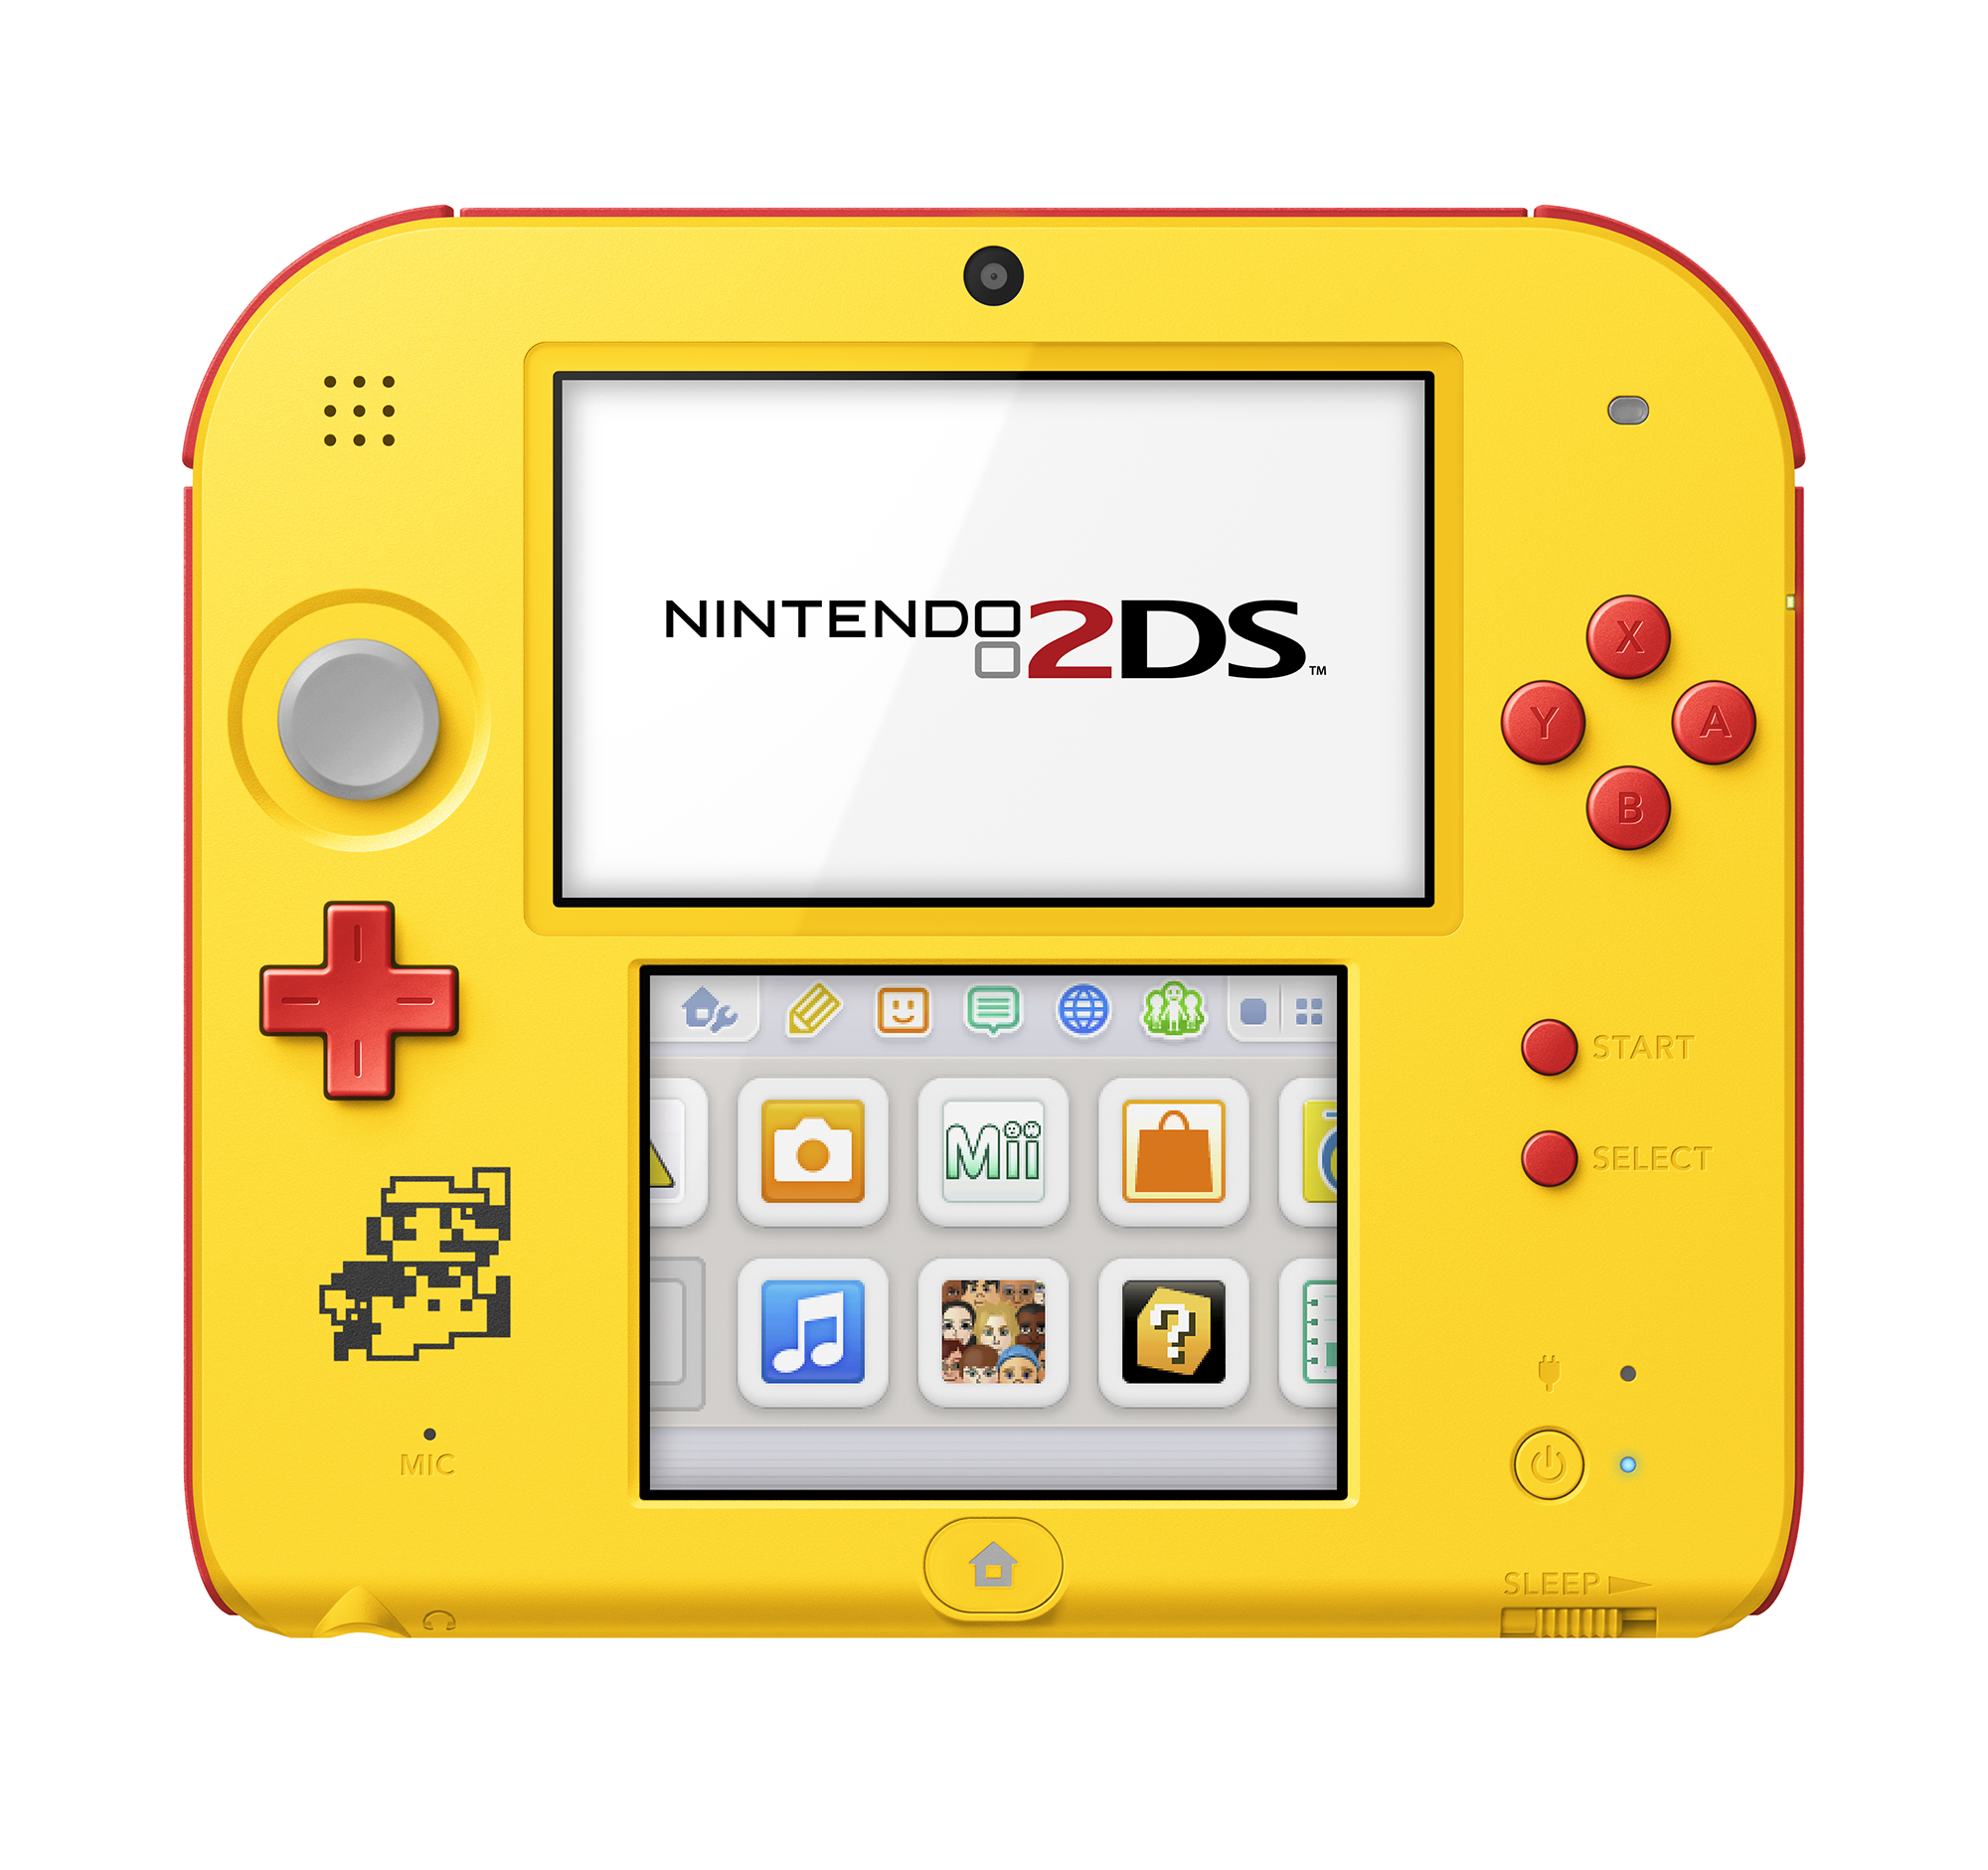 Nintendo 2DS System with Super Mario Maker (Pre-Installed), Yellow / Red, FTRSYBDW - image 1 of 7